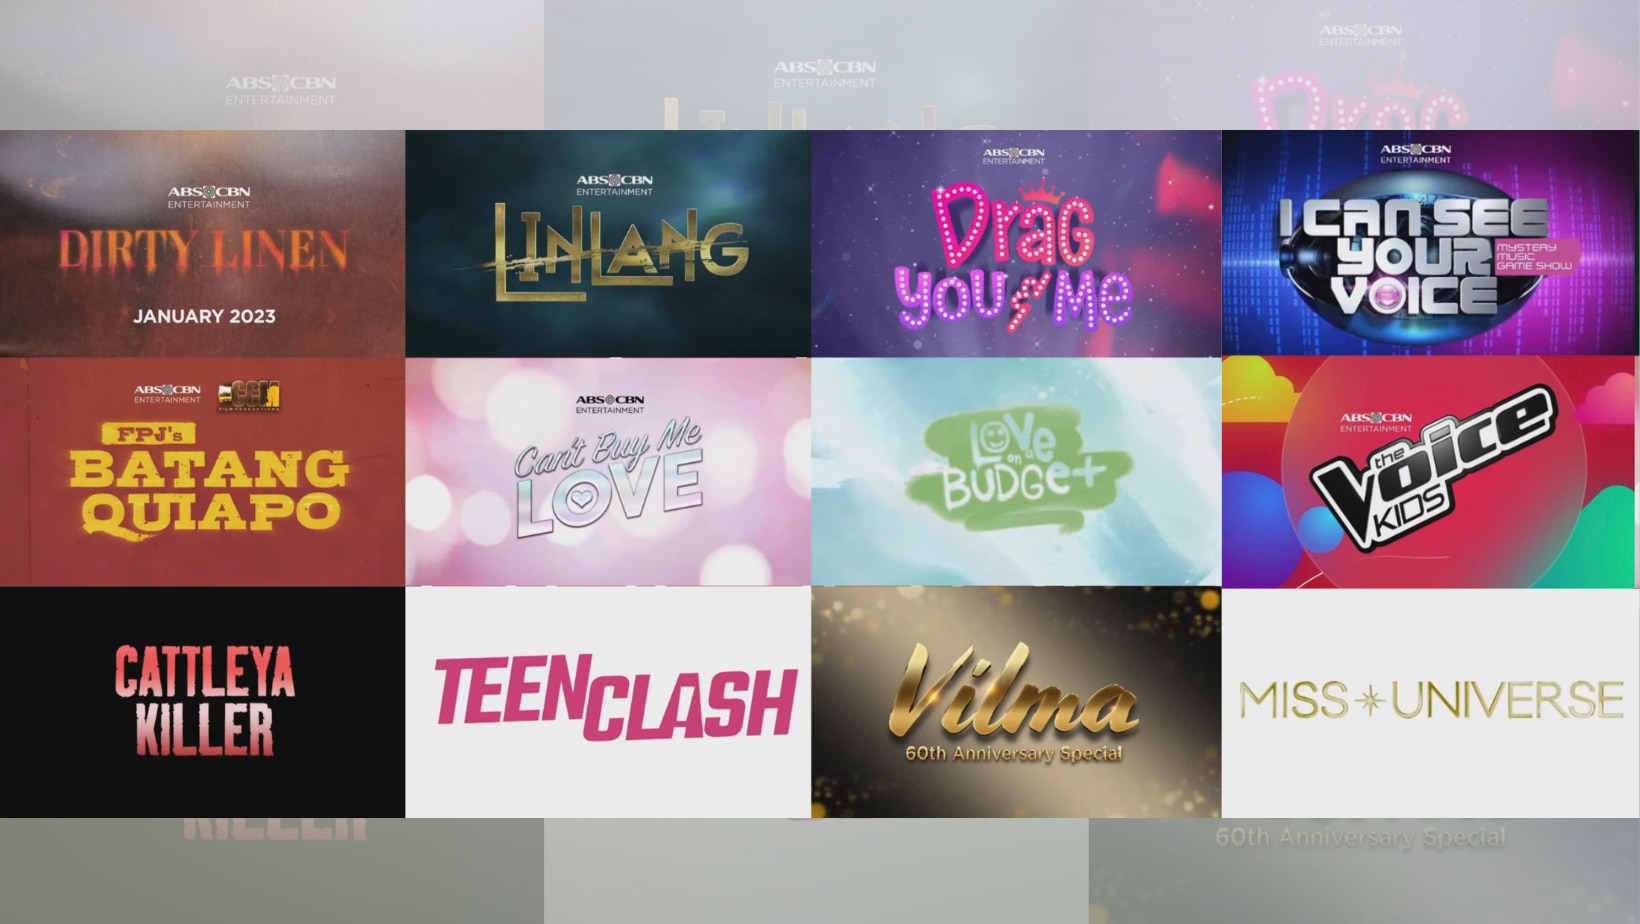 ABS CBN 2023 OFFERINGS